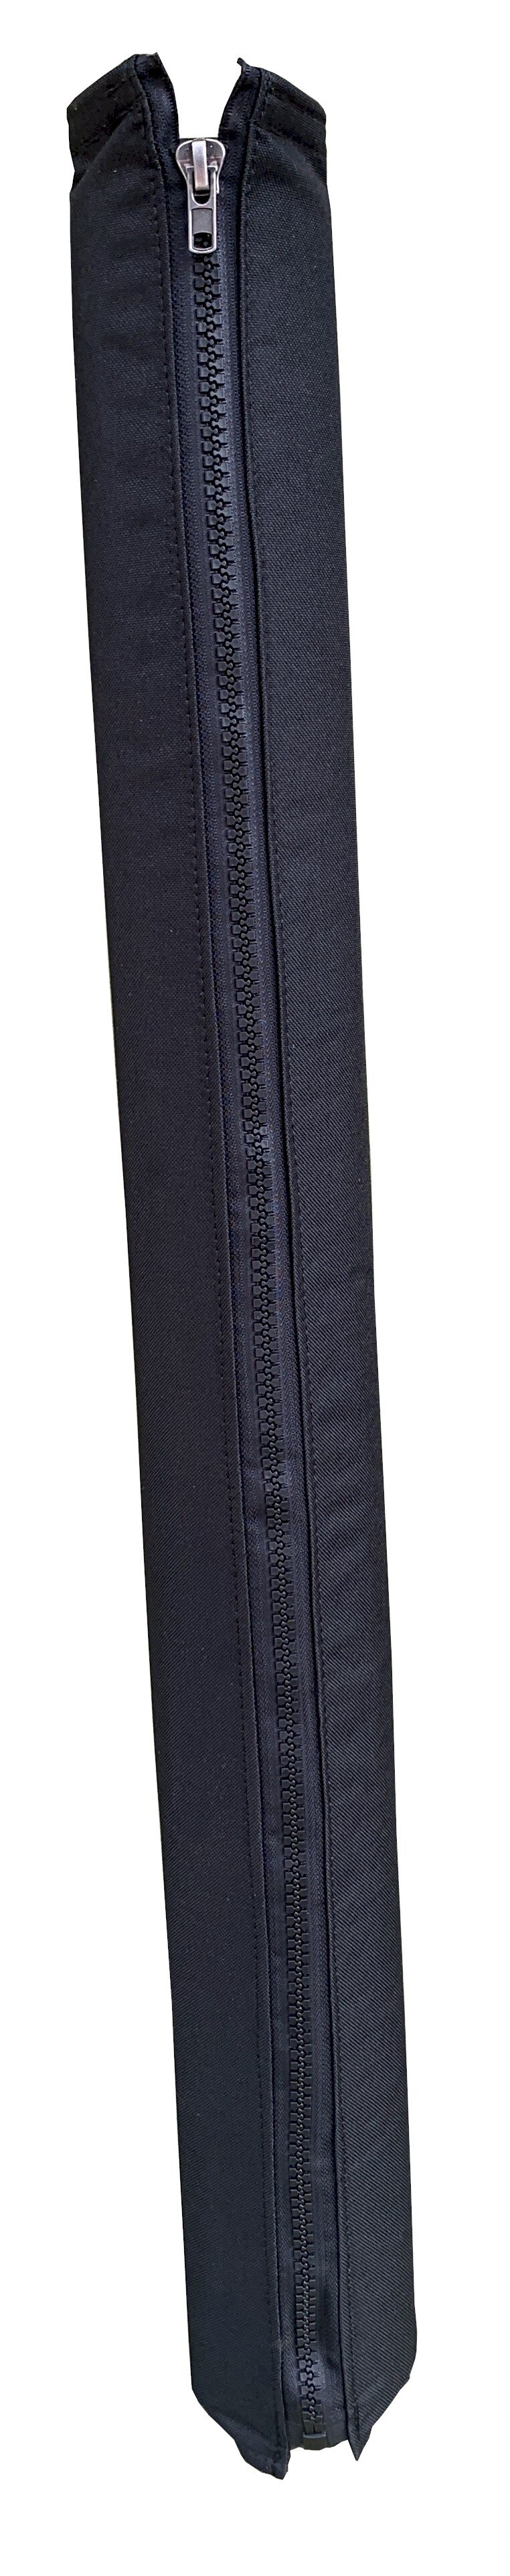 Zippered Upright Covers